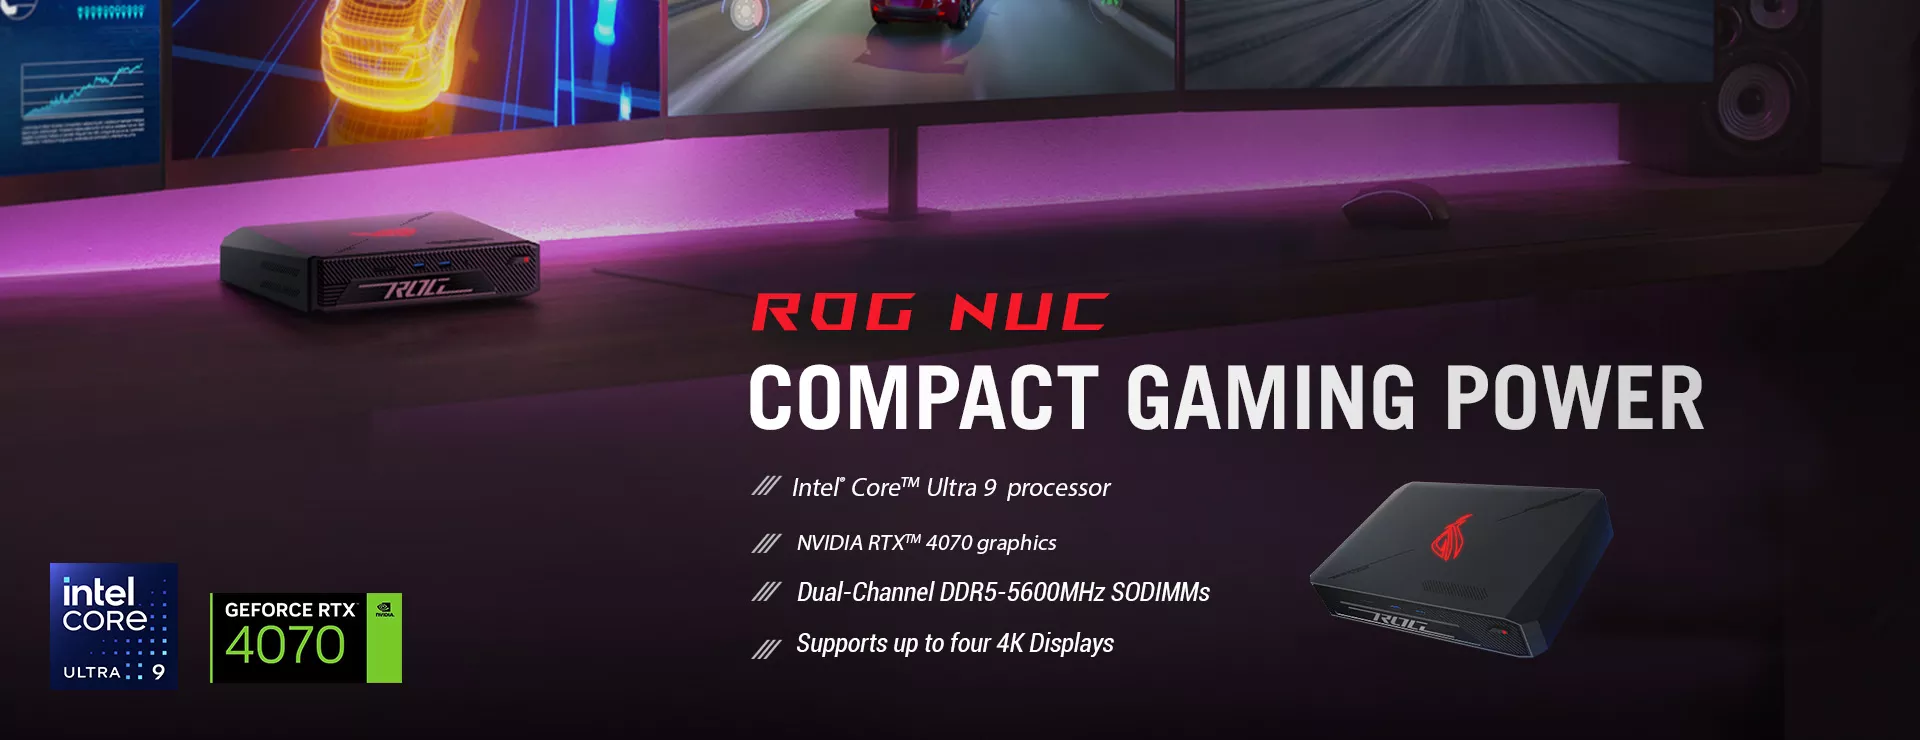 A ROG NUC is placed on the table and connected to four displays, each showing different racing car gaming scenes, demonstrating the compact size and powerful performance of the ROG NUC